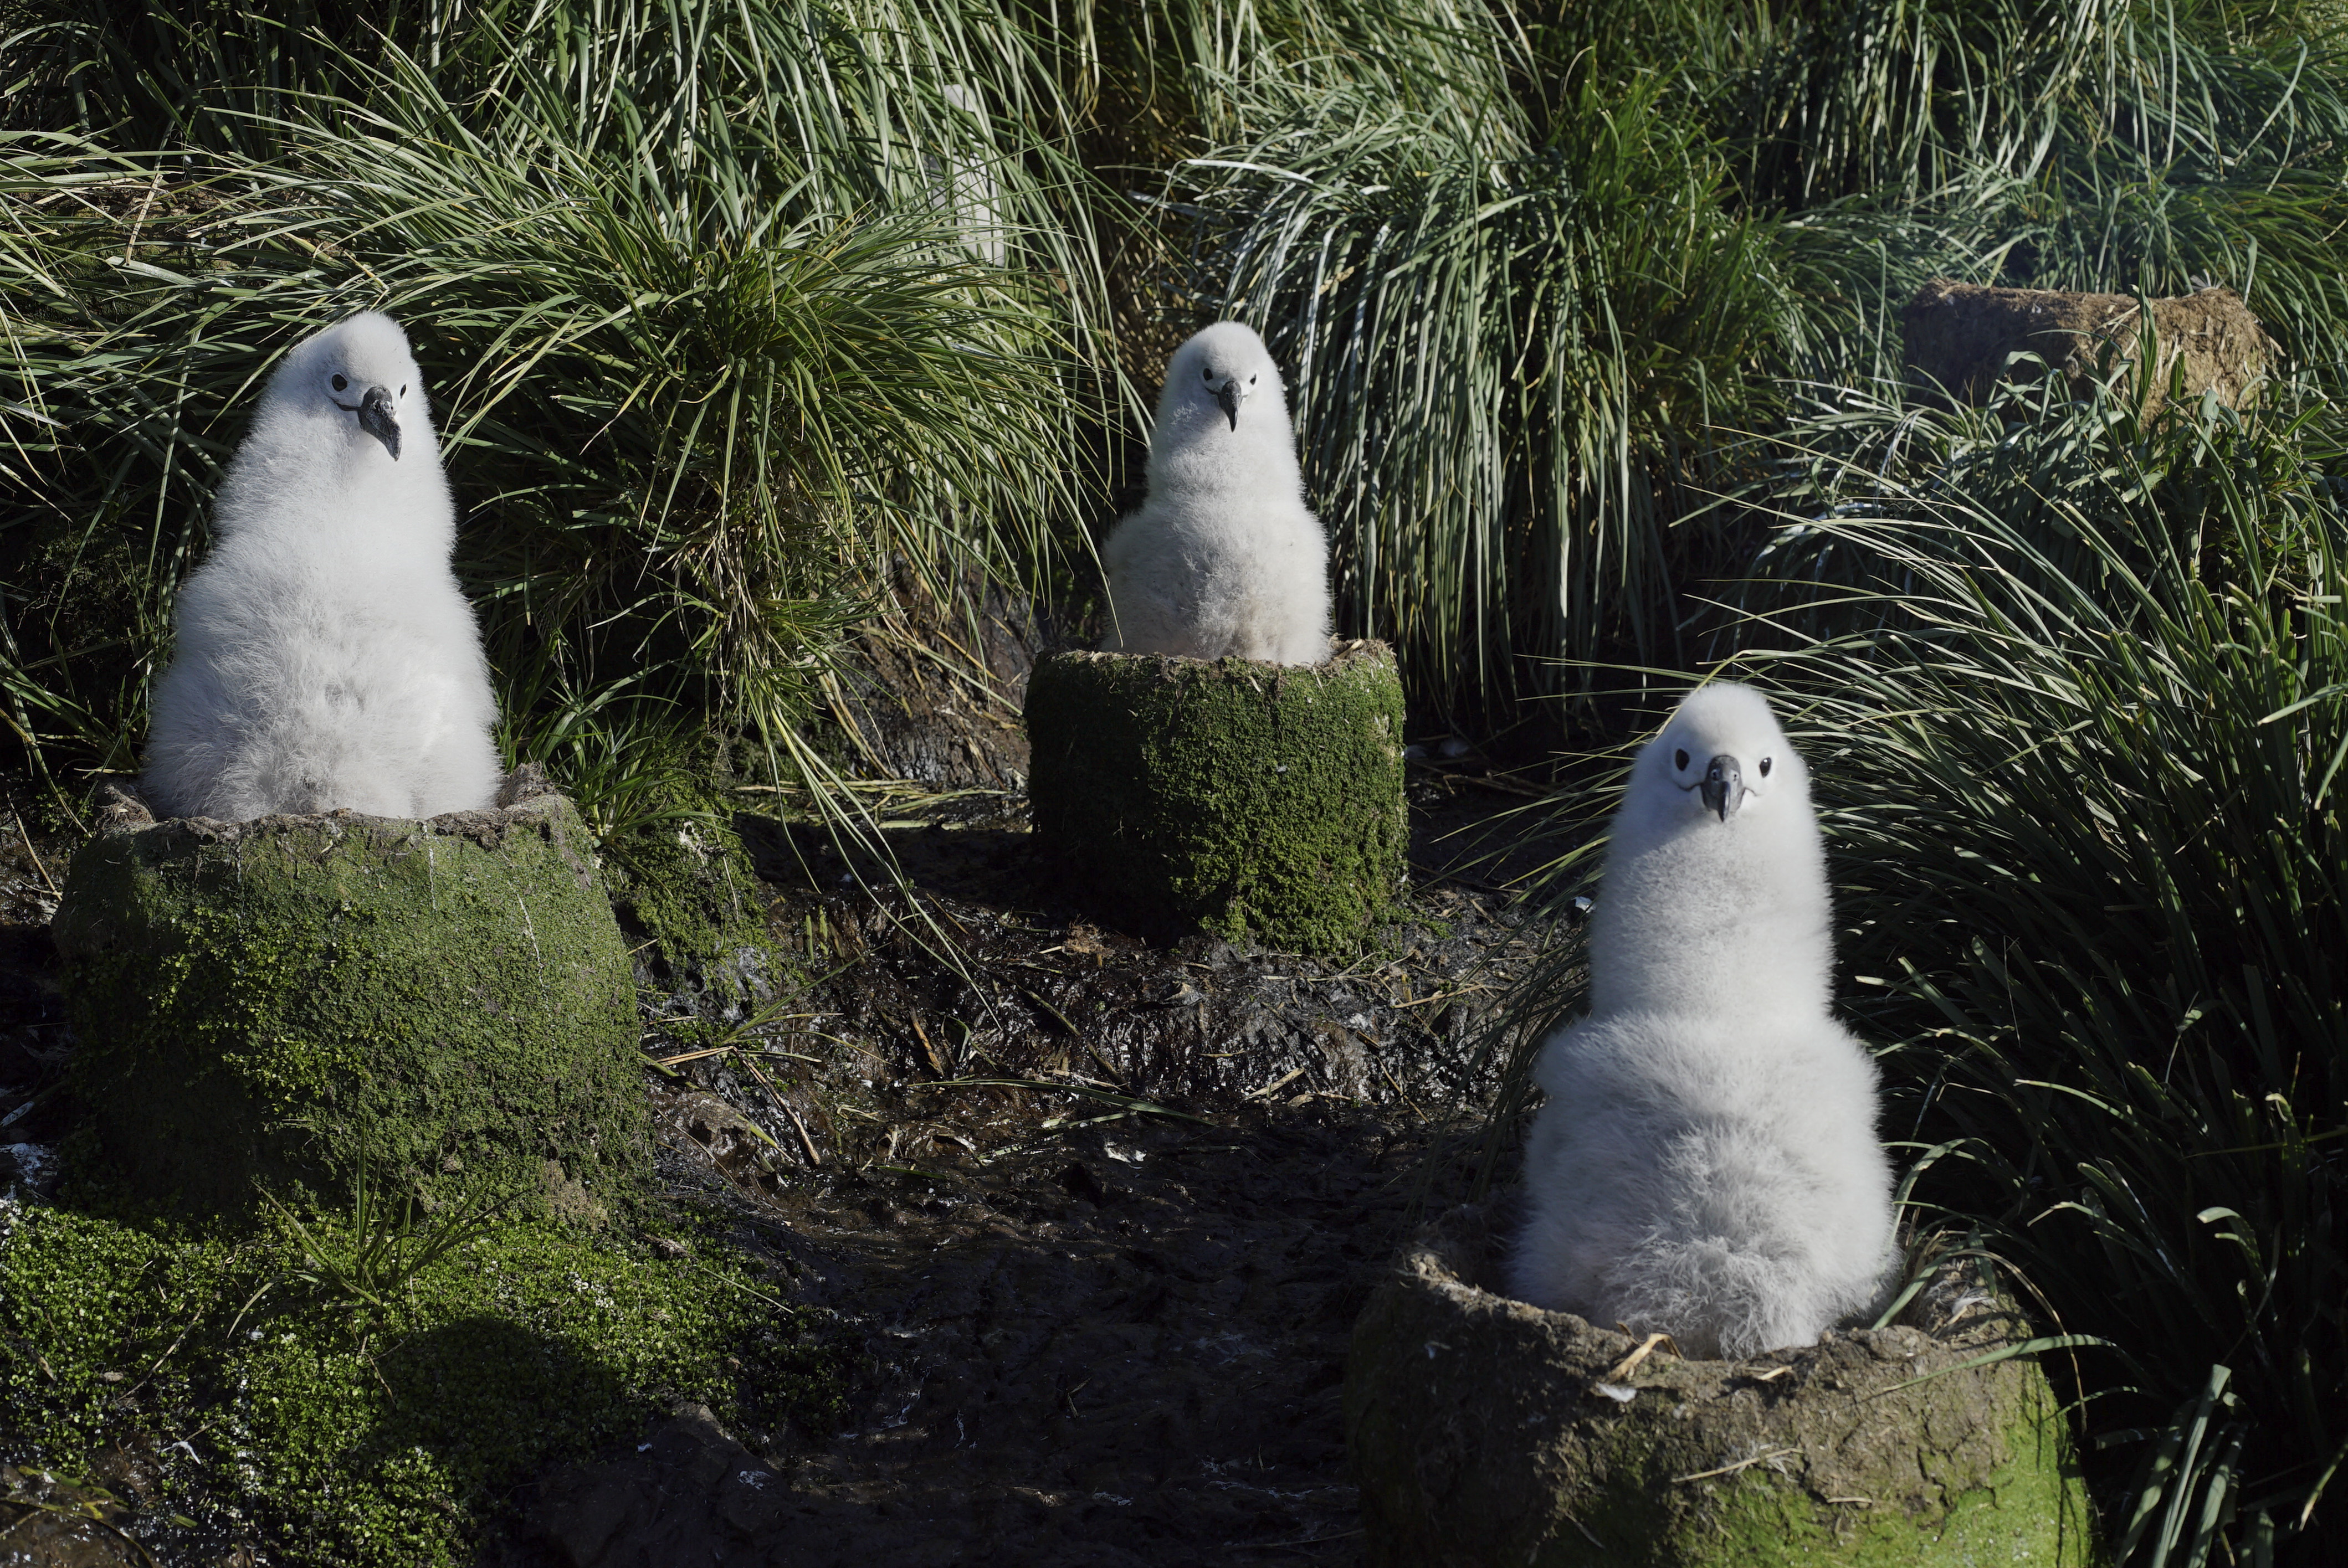 Grey headed albatross chicks sit on large nests built out of mud and tussock grass in Seven Worlds, One Planet 